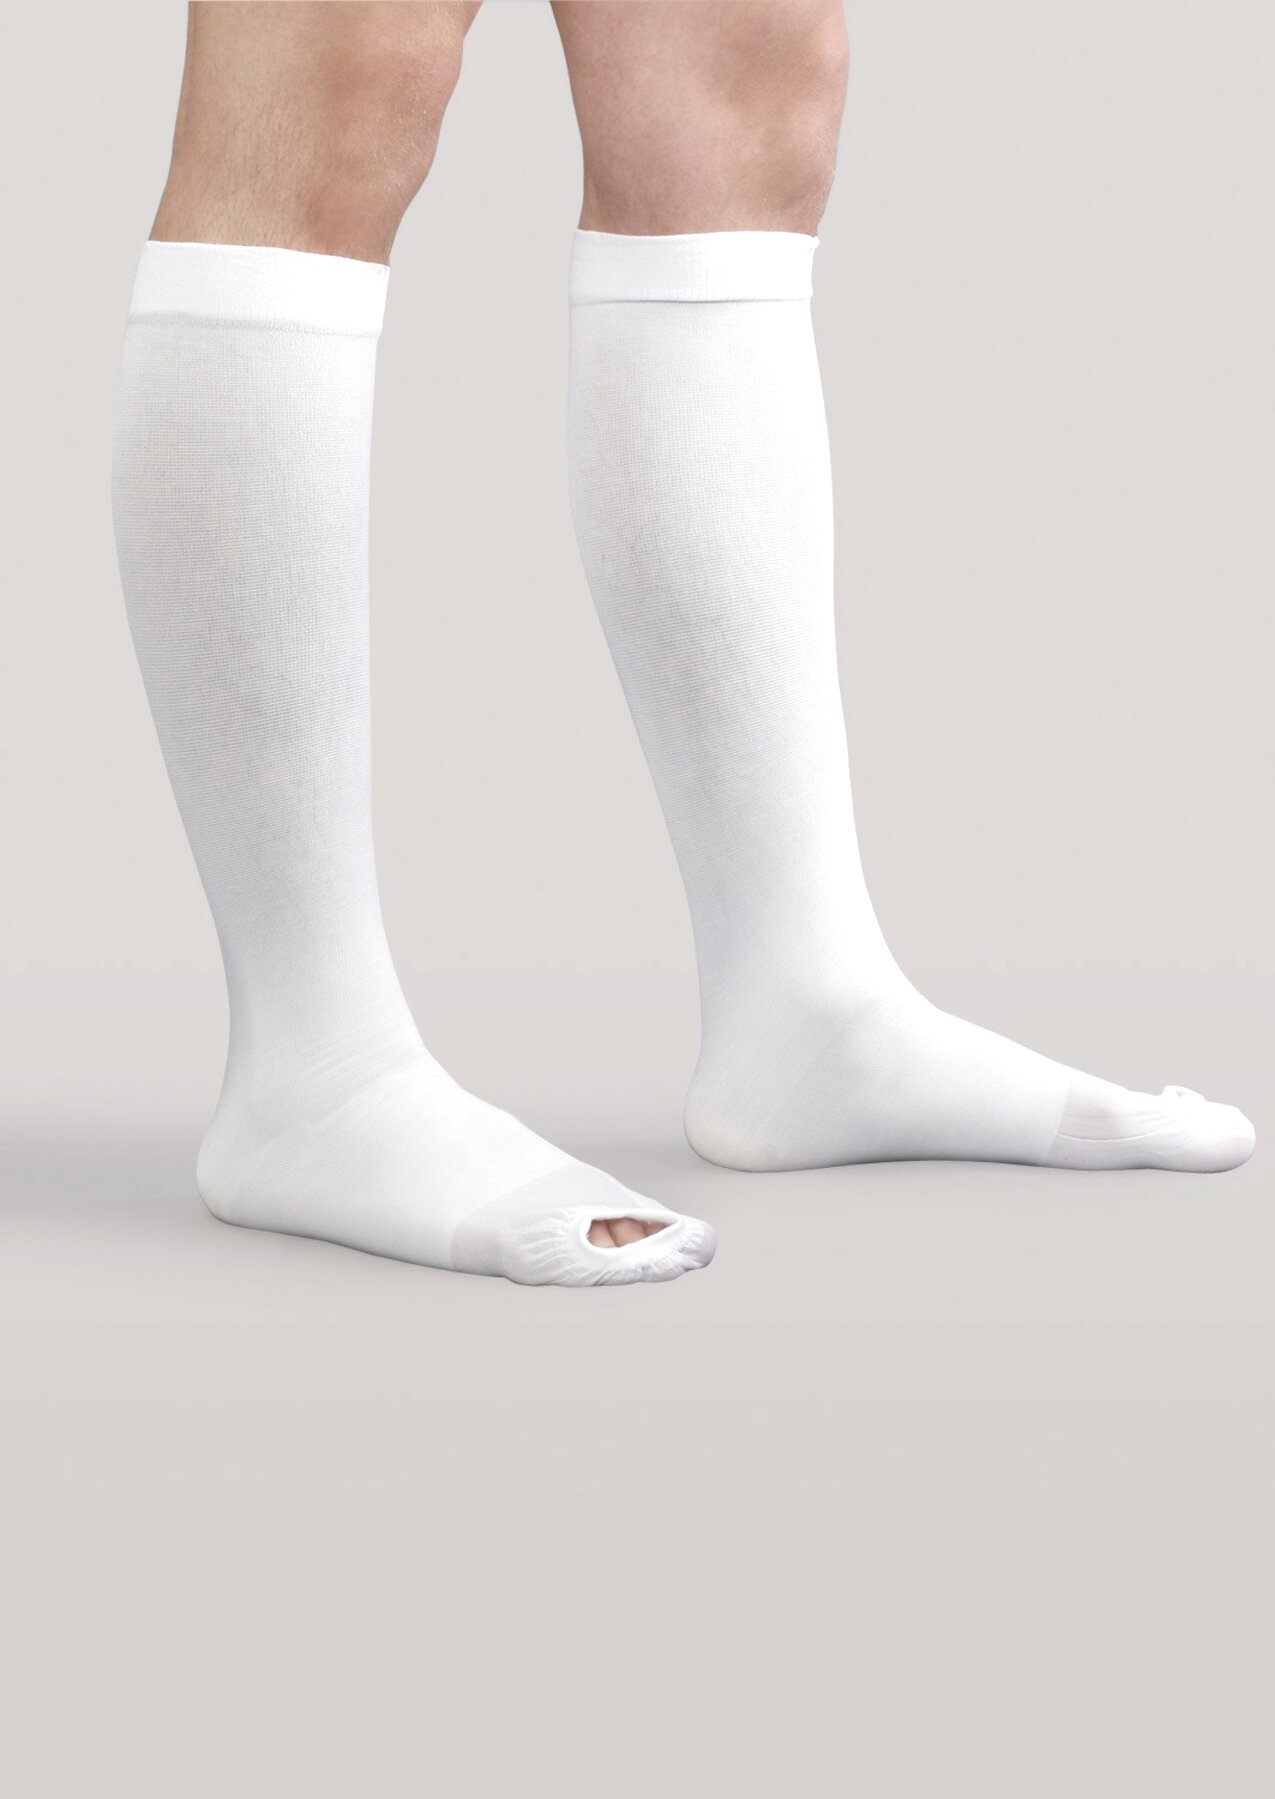 Anti Embolism Stockings for sale in UK | 38 used Anti Embolism Stockings